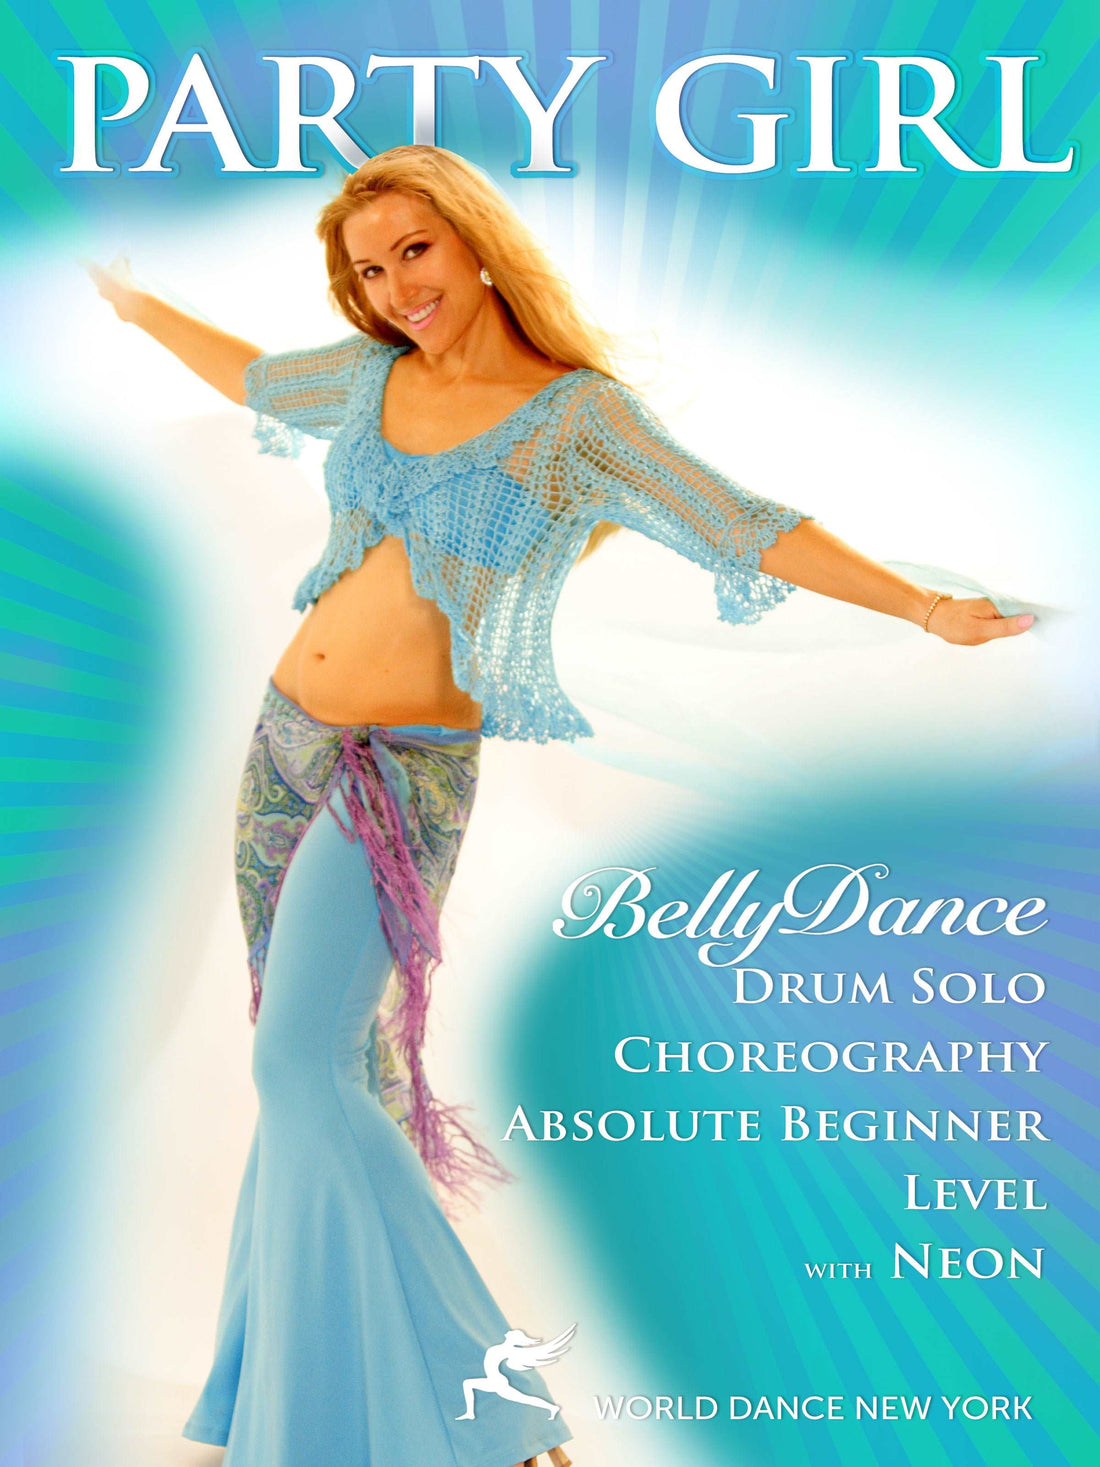 Party Girl - A Belly Dance Drum Solo by Neon for beginners - Instant Streaming Video - World Dance New York